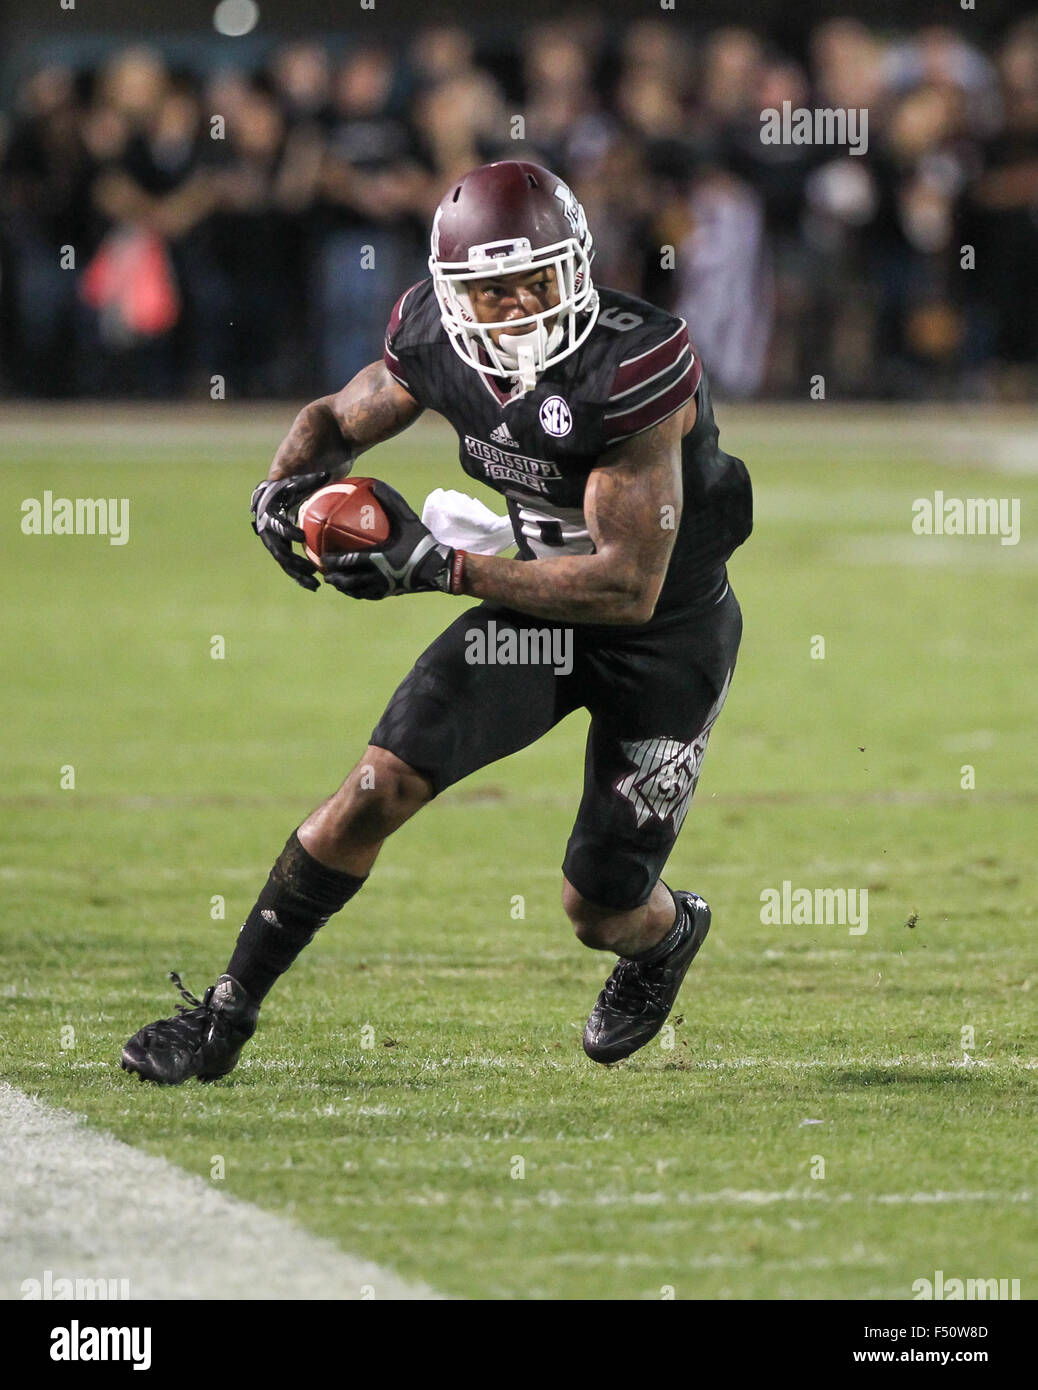 Starkville, MS, USA. 24th Oct, 2015. Mississippi State Bulldogs wide receiver Donald Gray (6) runs down the sidelines during the NCAA Football game between the Mississippi State Bulldogs and the Kentucky Wildcats at Davis Wade Stadium in Starkville, MS. Chuck Lick/CSM/Alamy Live News Stock Photo